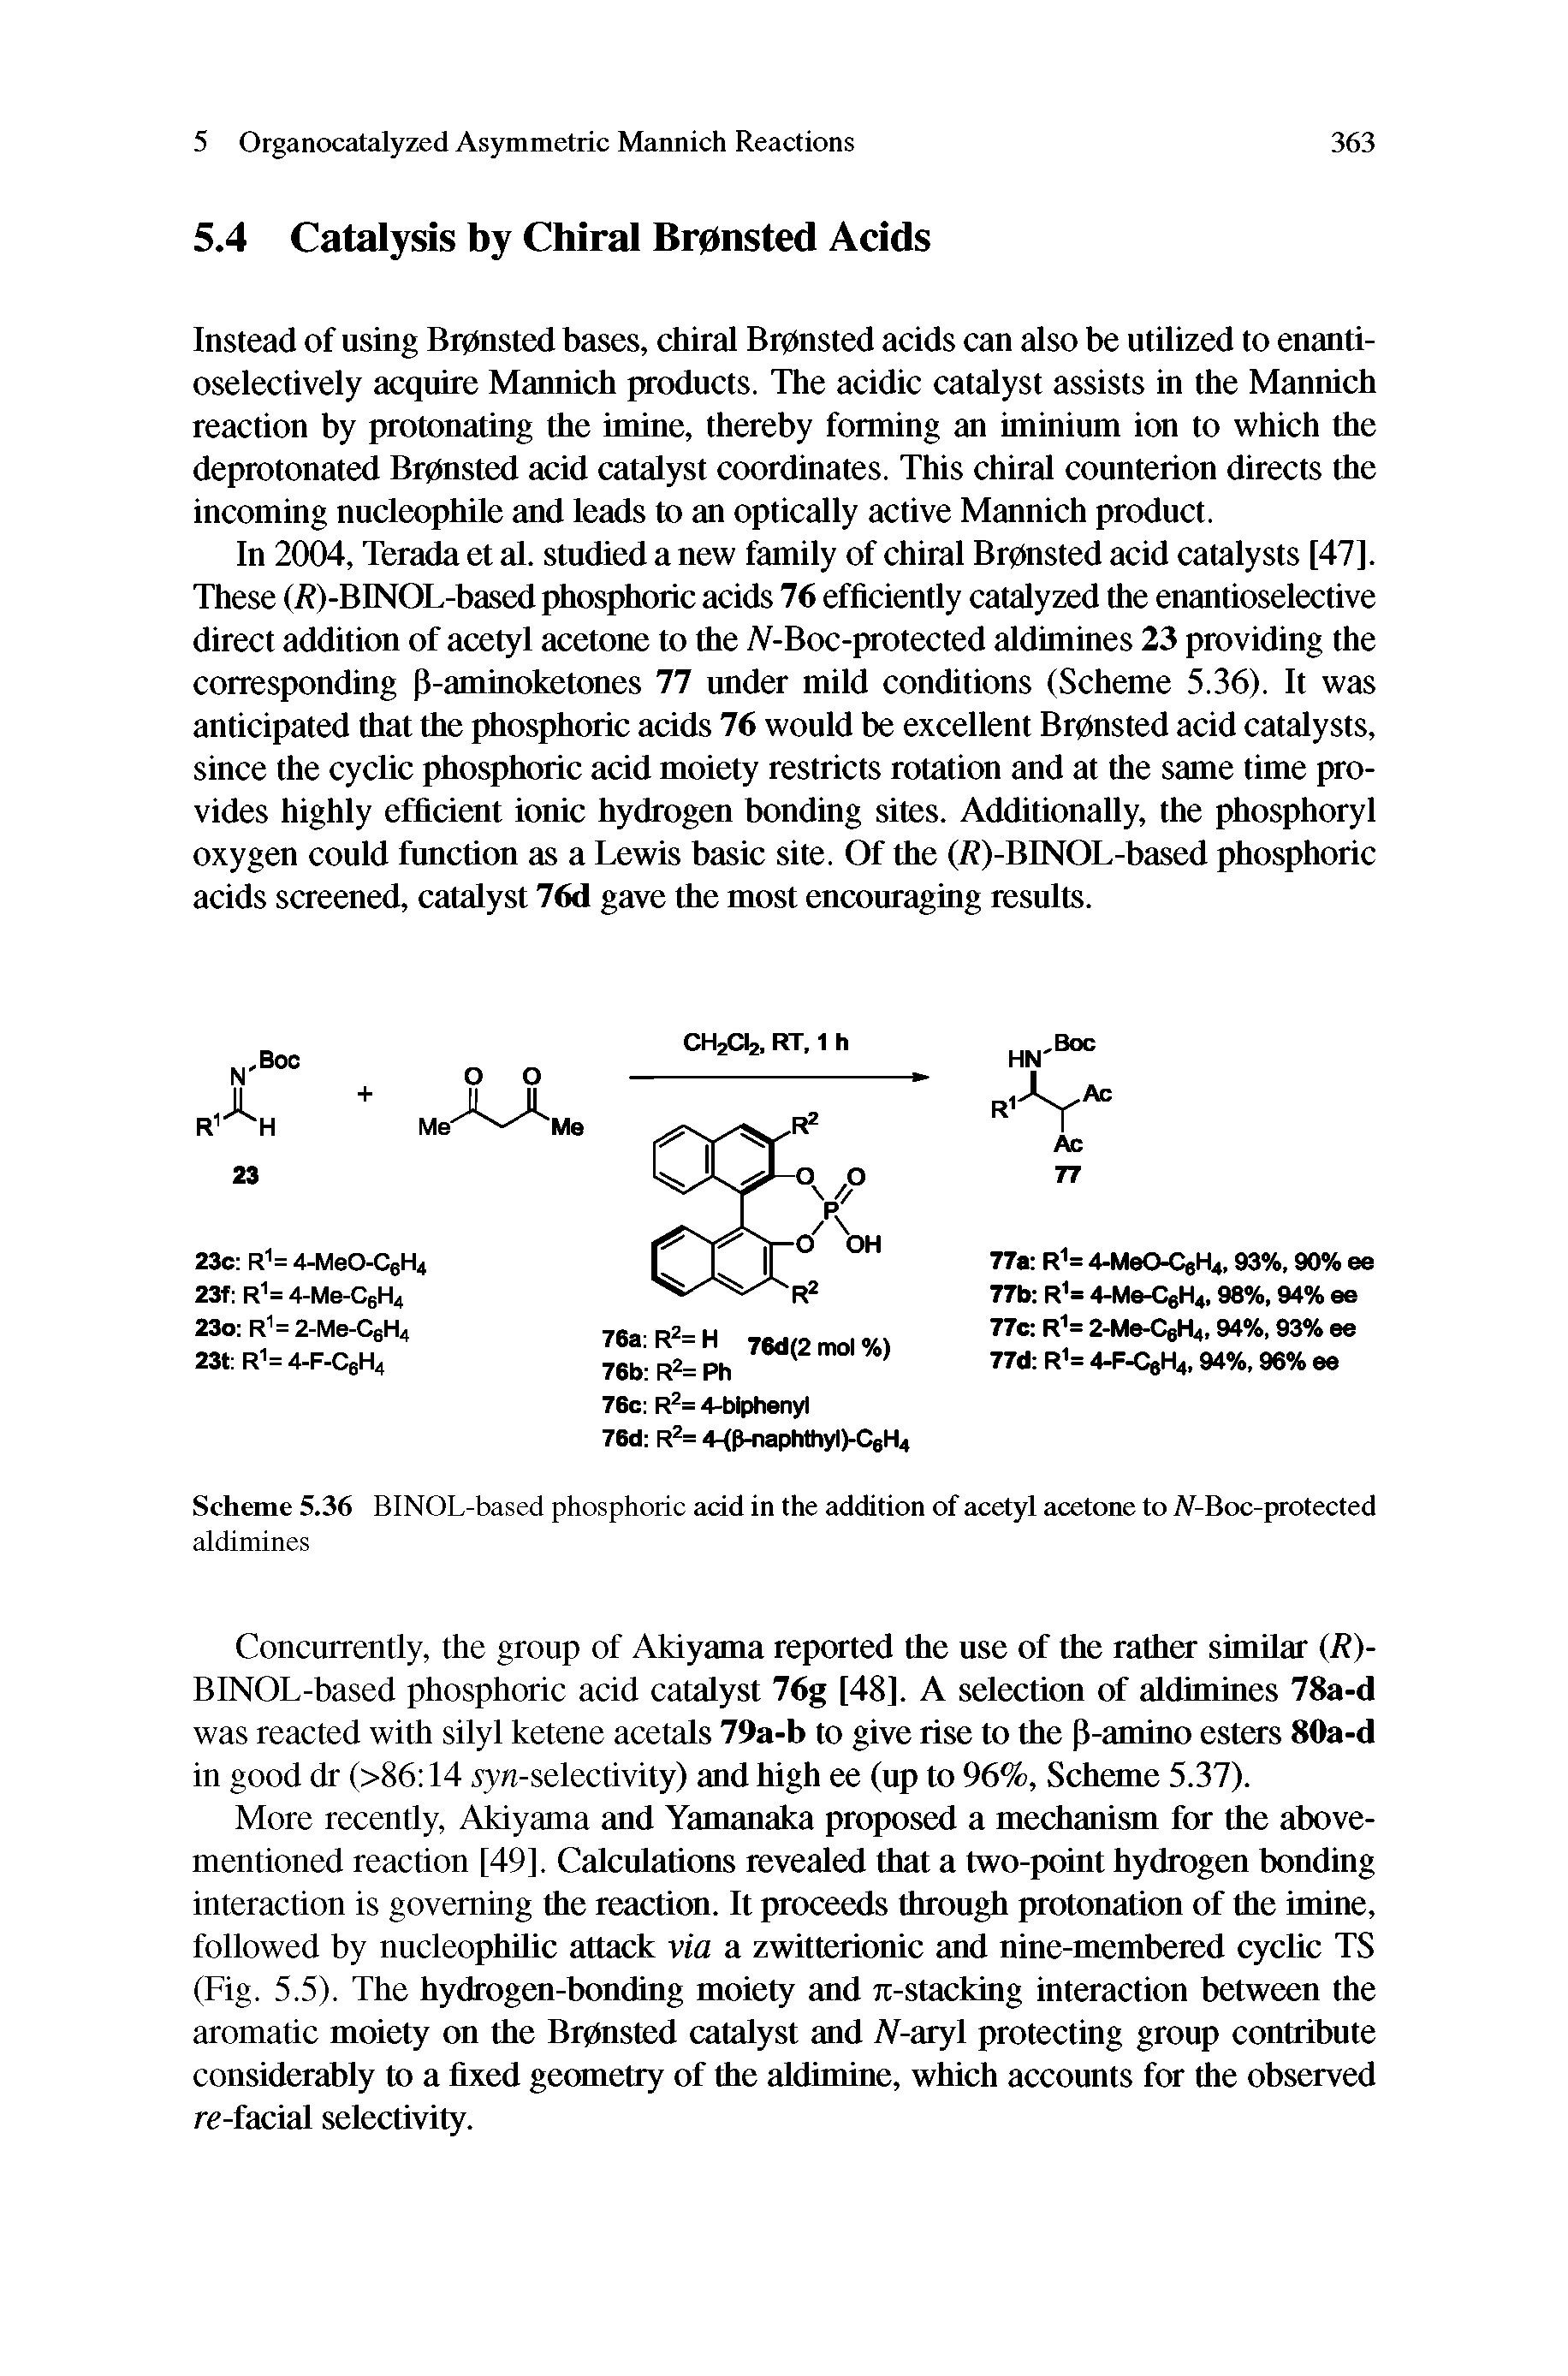 Scheme 5.36 BINOL-based phosphoric add in the addition of acetyl acetone to Ai-Boc-protected aldimines...